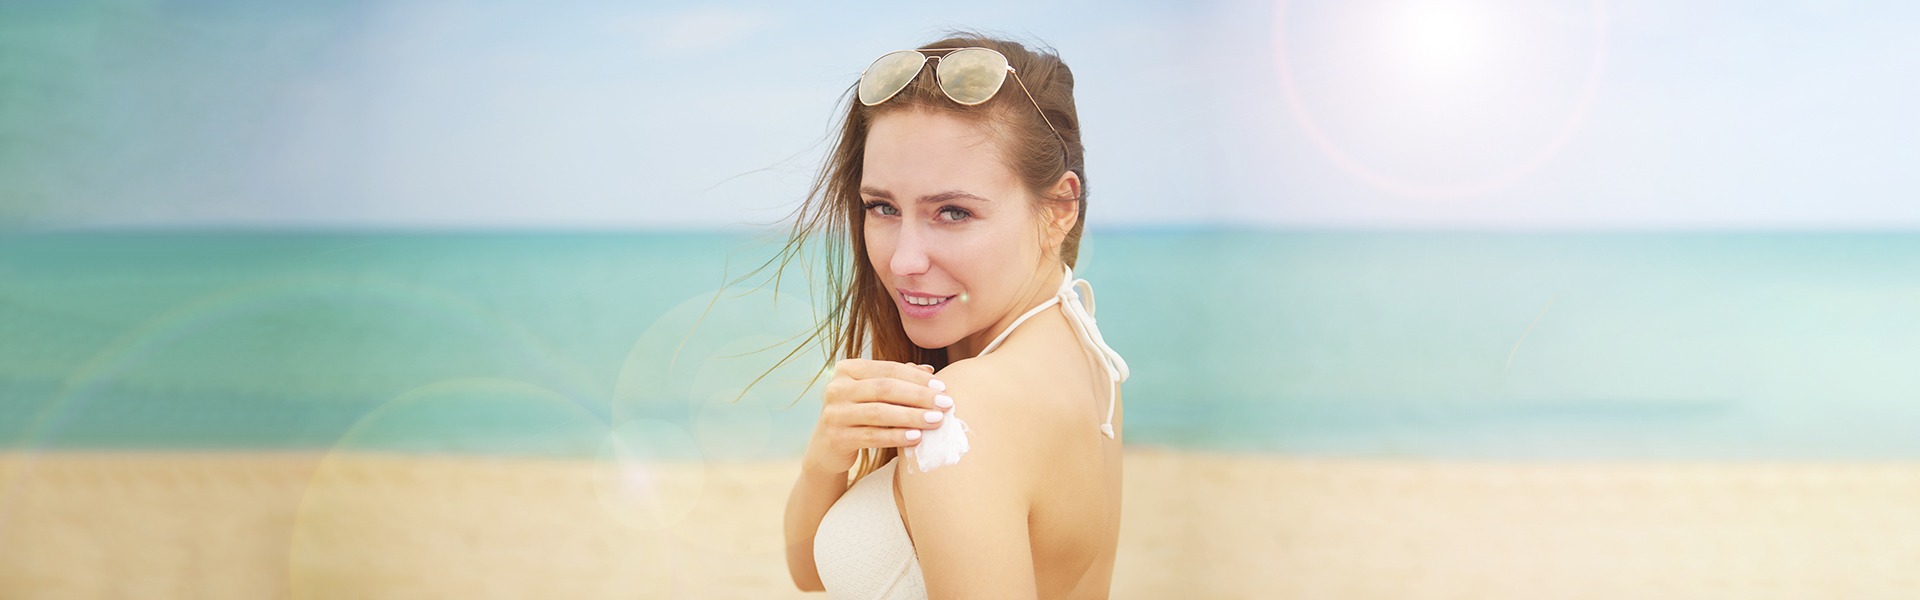 Sun Damaged Skin: How to Spot the Signs and Symptoms